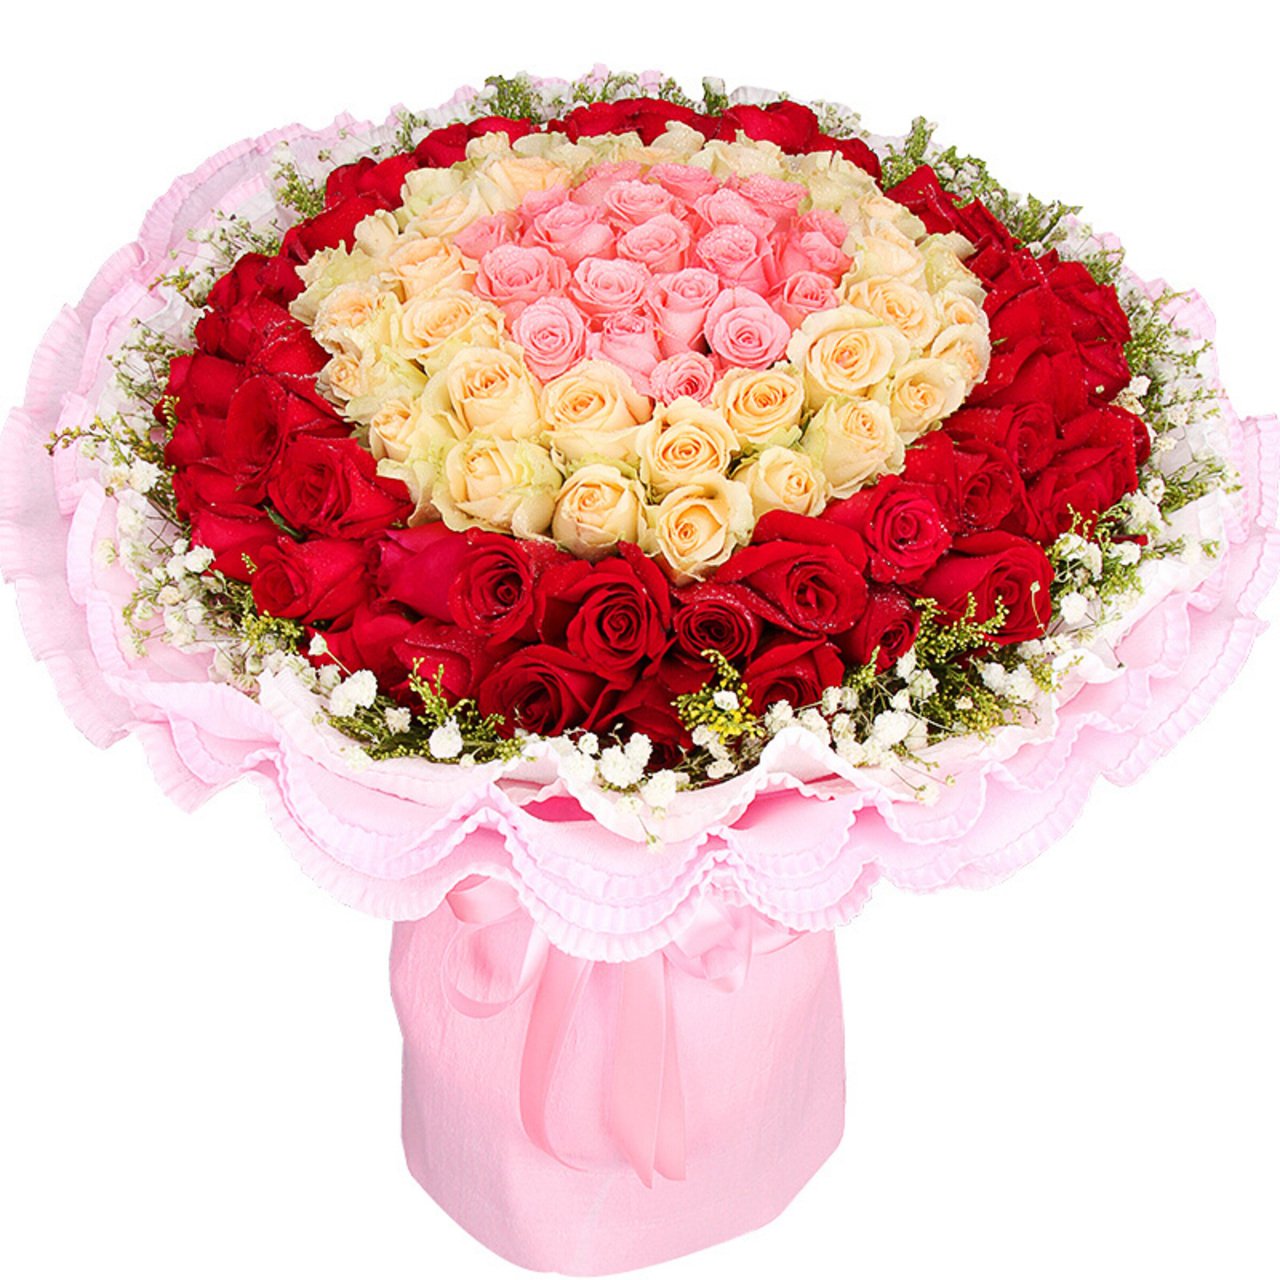 A lifetime commitment(
99 mixed roses
-